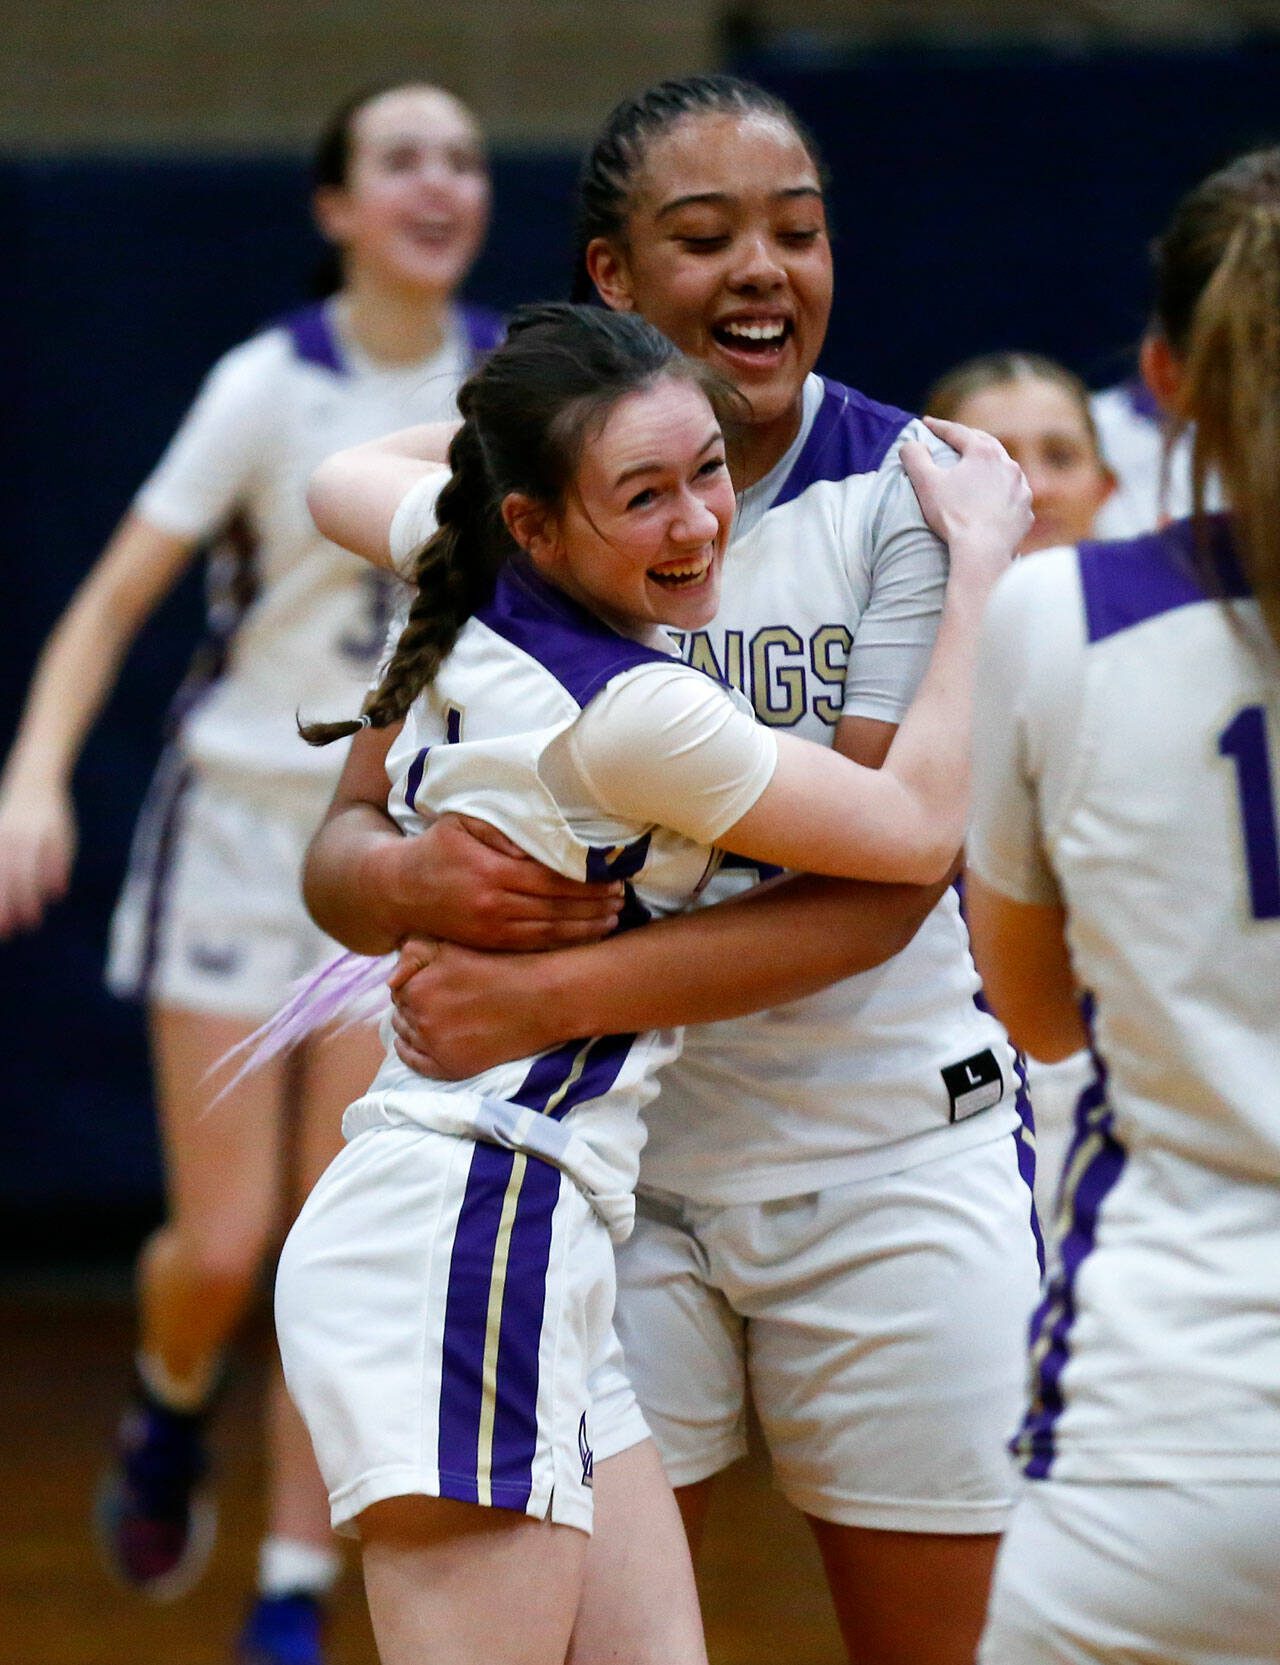 Lake Stevens players celebrate a victory over Skyview during a state regionals matchup Feb. 23 in Arlington. (Ryan Berry / The Herald)